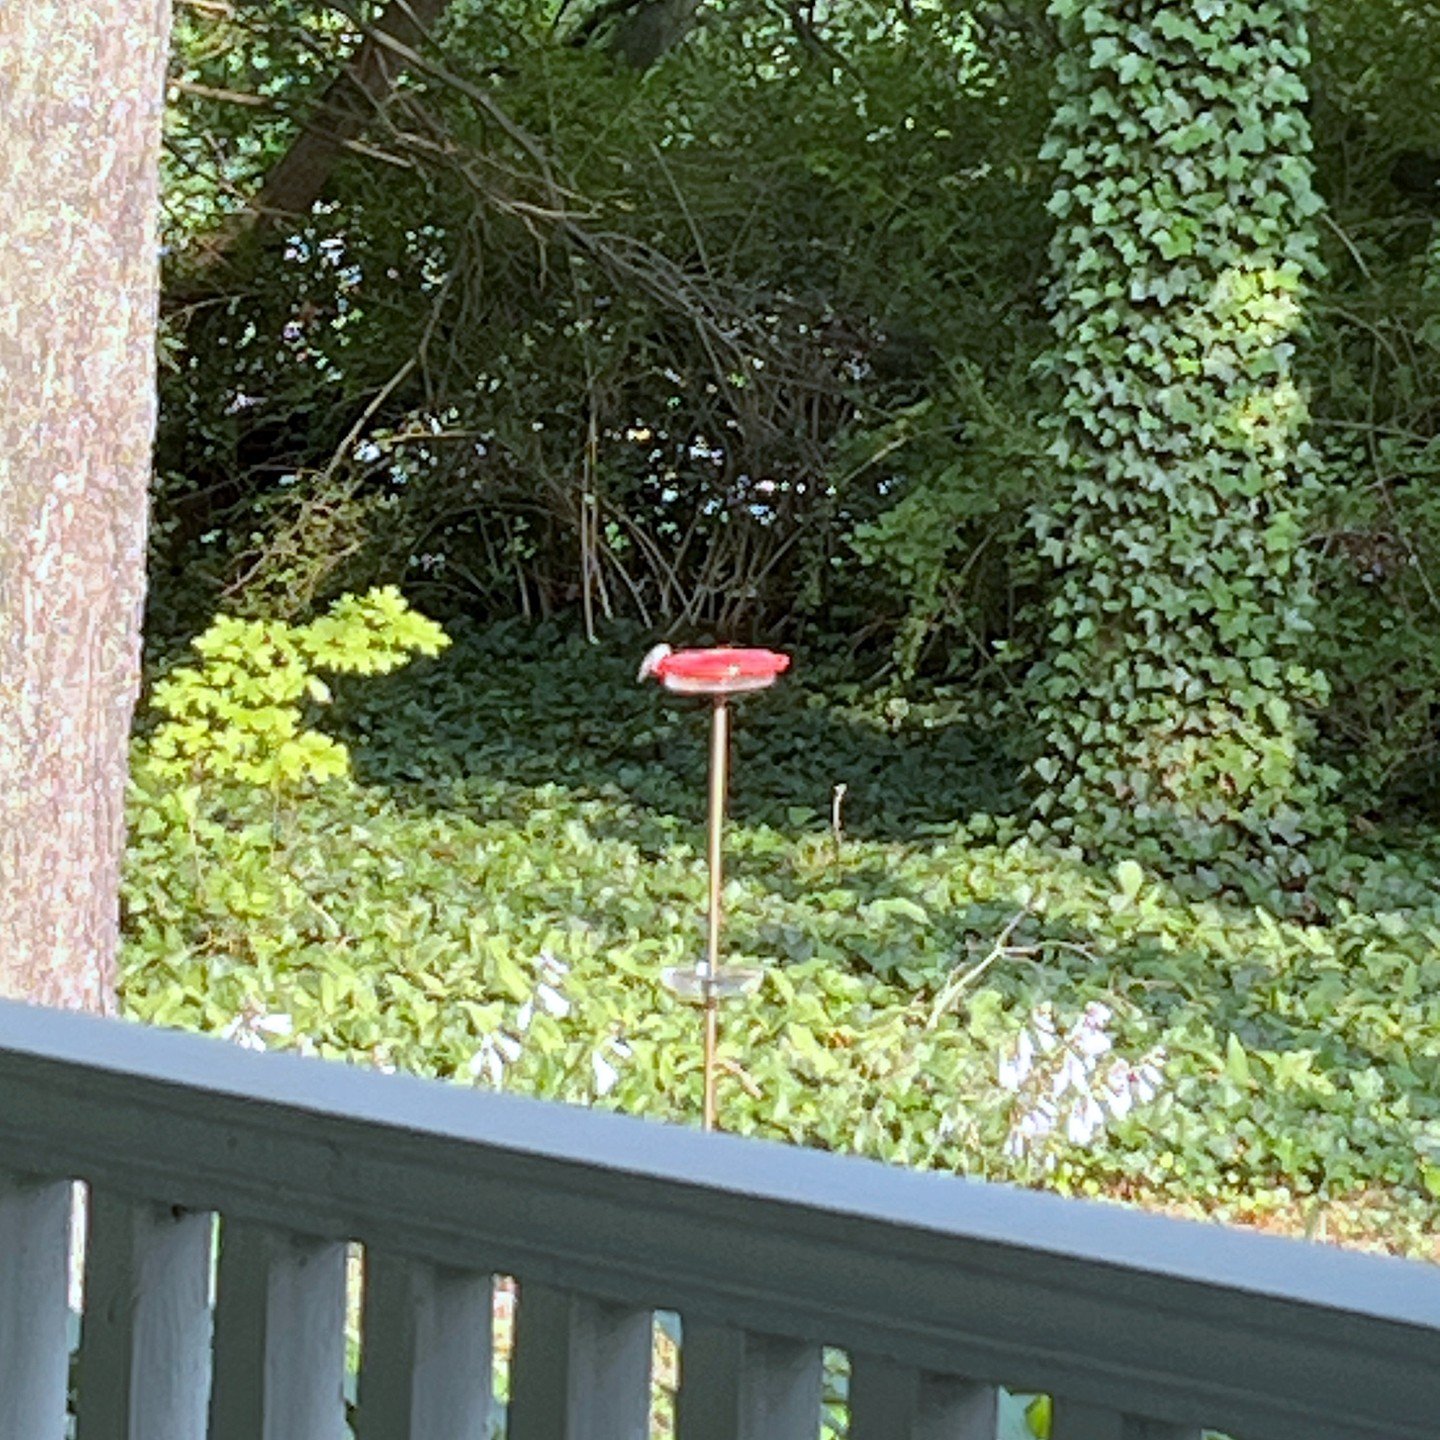 We put a lot of effort into designing The Ant-Mote&trade; to make sure that it would do its job exceptionally well. Nothing makes us happier than seeing our local hummingbirds happily using our #nectarfeeder surrounded by #hosta and ivy in our garden